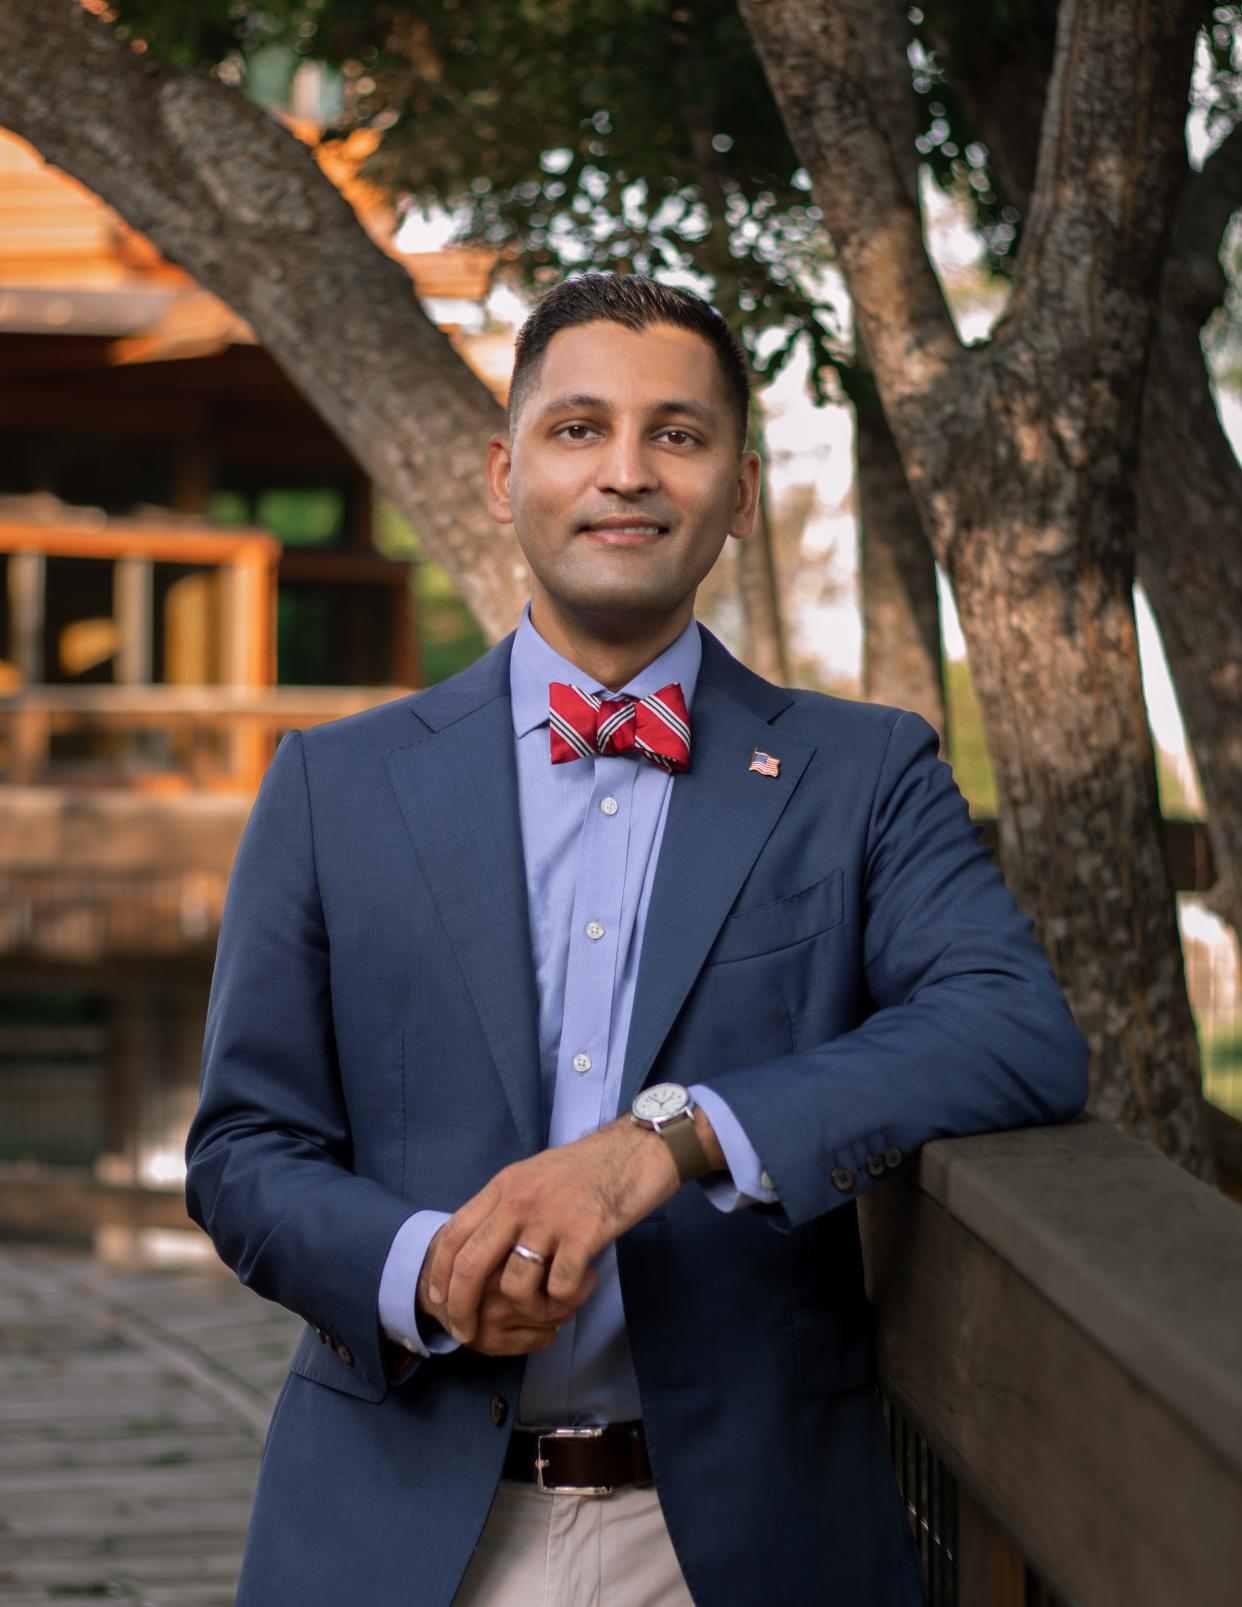 Tal Siddique is challenging Chairman Kevin Van Ostenbridge for the Manatee County District 3 seat.